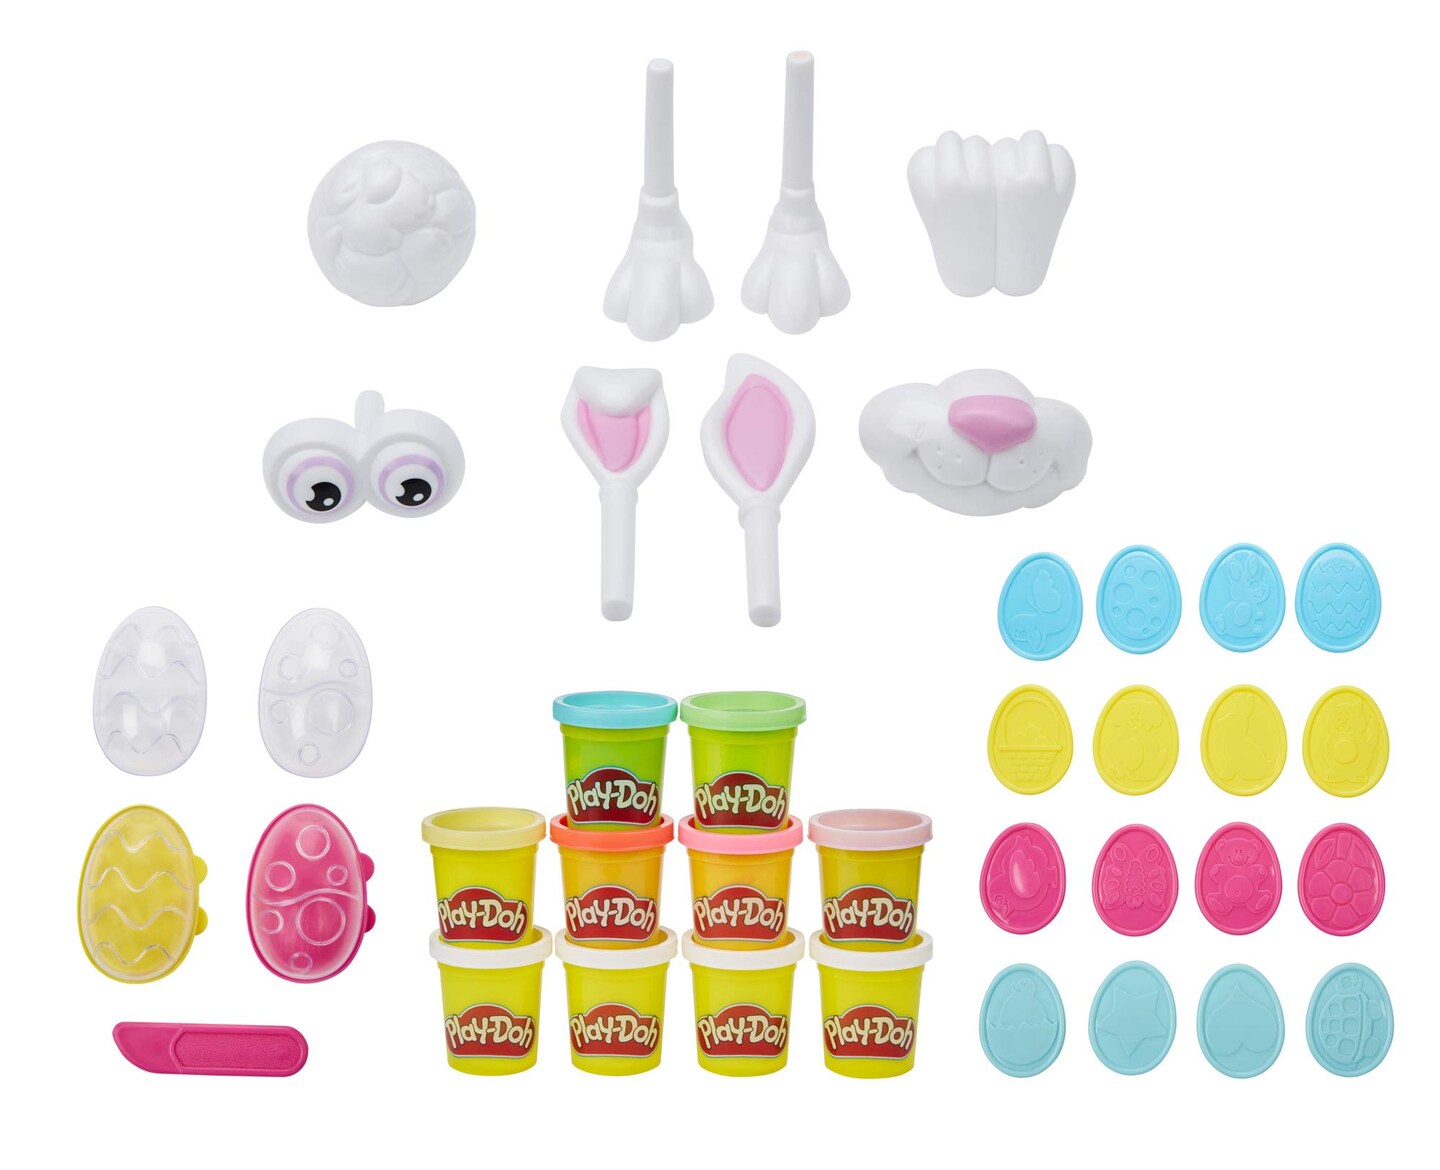 Play-Doh Easter Basket Toys 25-Piece Bundle; Make Your Own Easter Bunny Kit with Easter Eggs, Stampers, 10 Play-Doh 2-Ounce Cans (Exclusive)